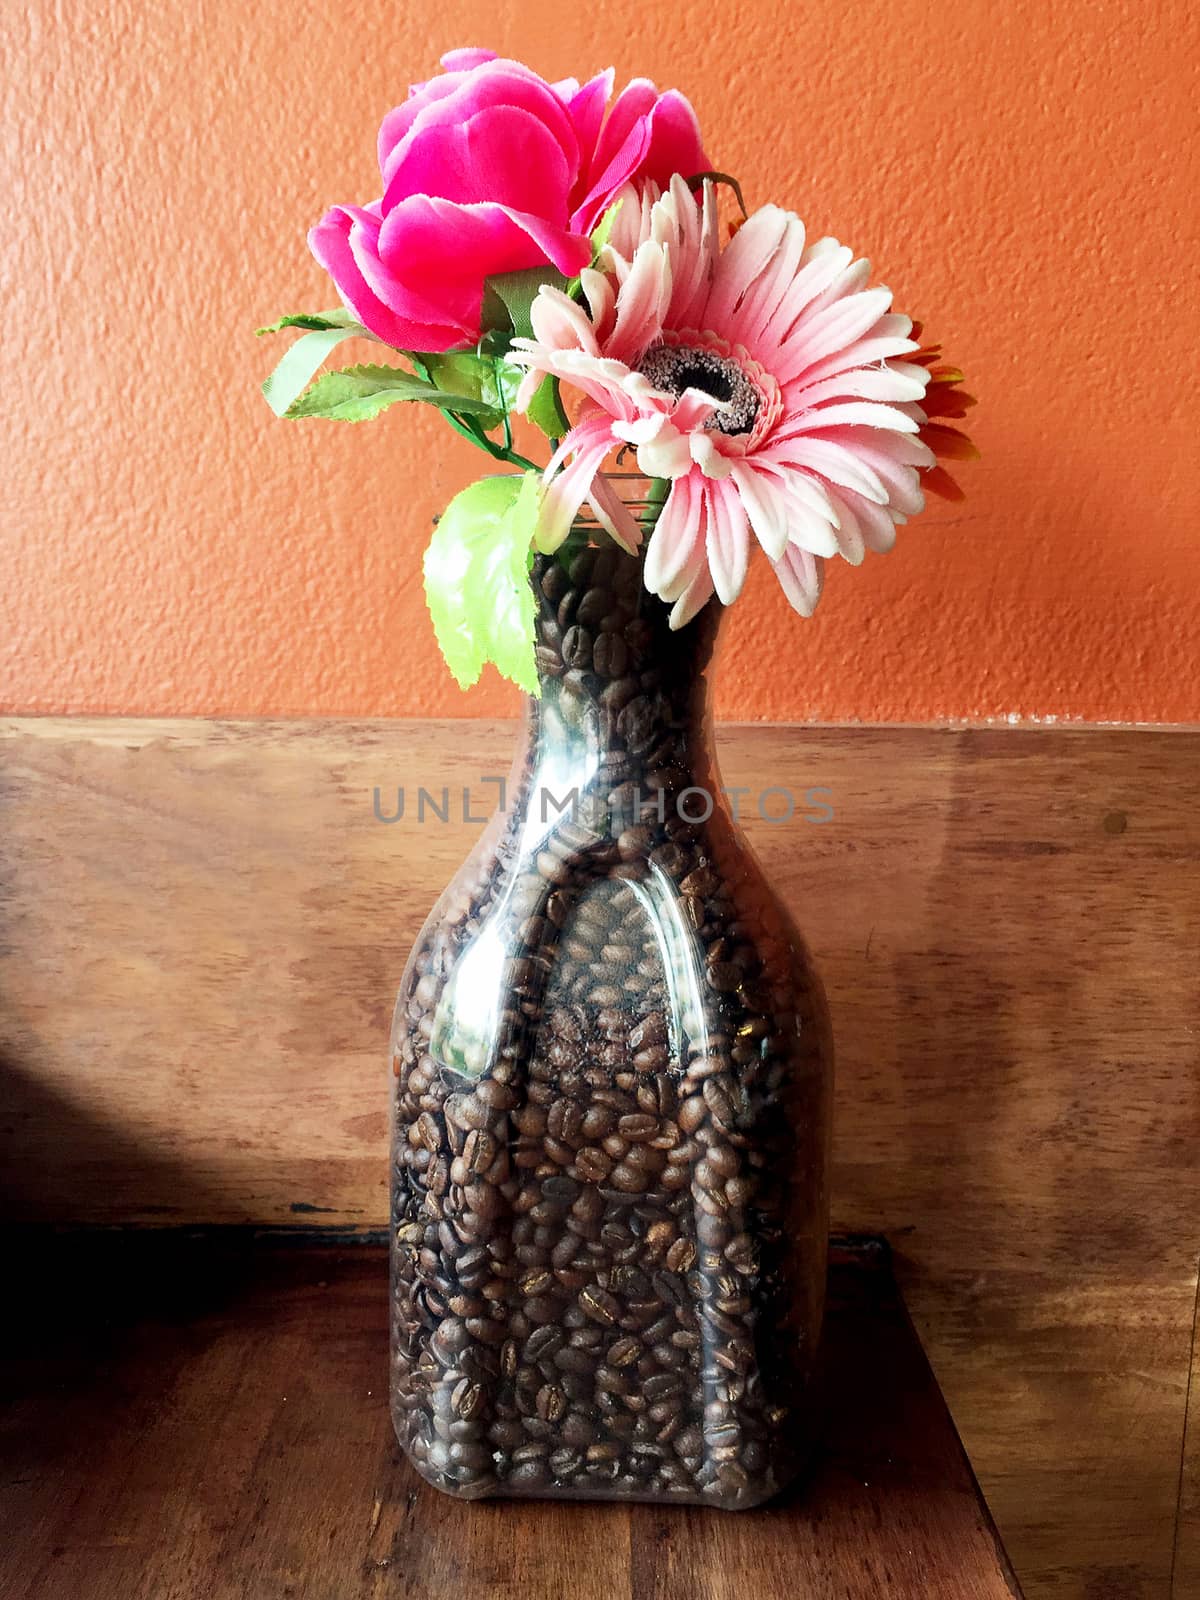 flower vase filled with coffee beans.